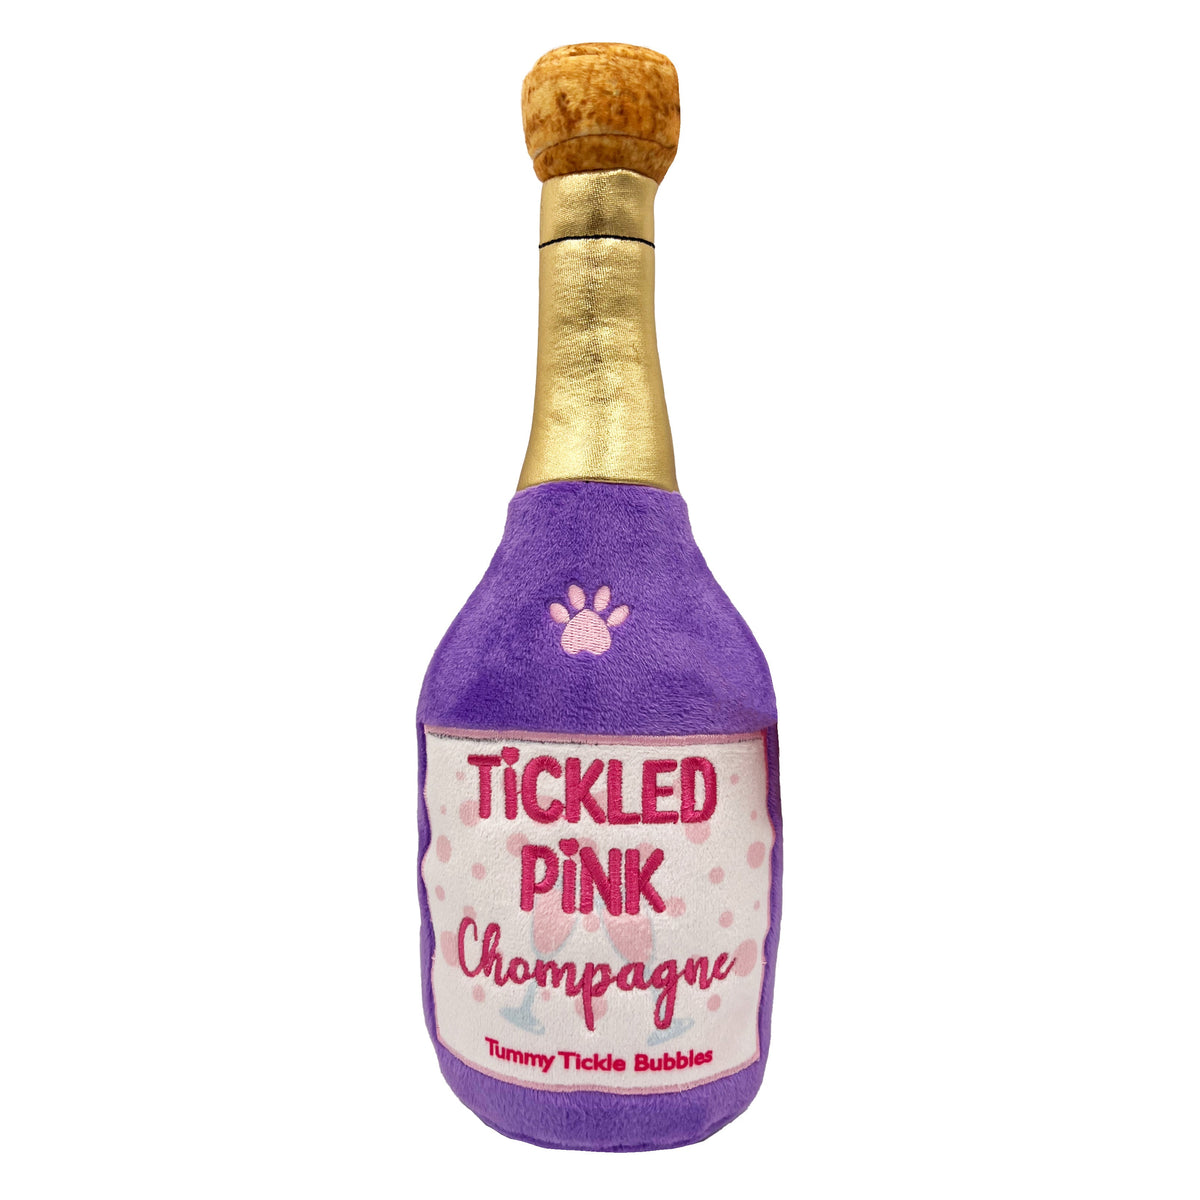 Tickled Pink Chompagne